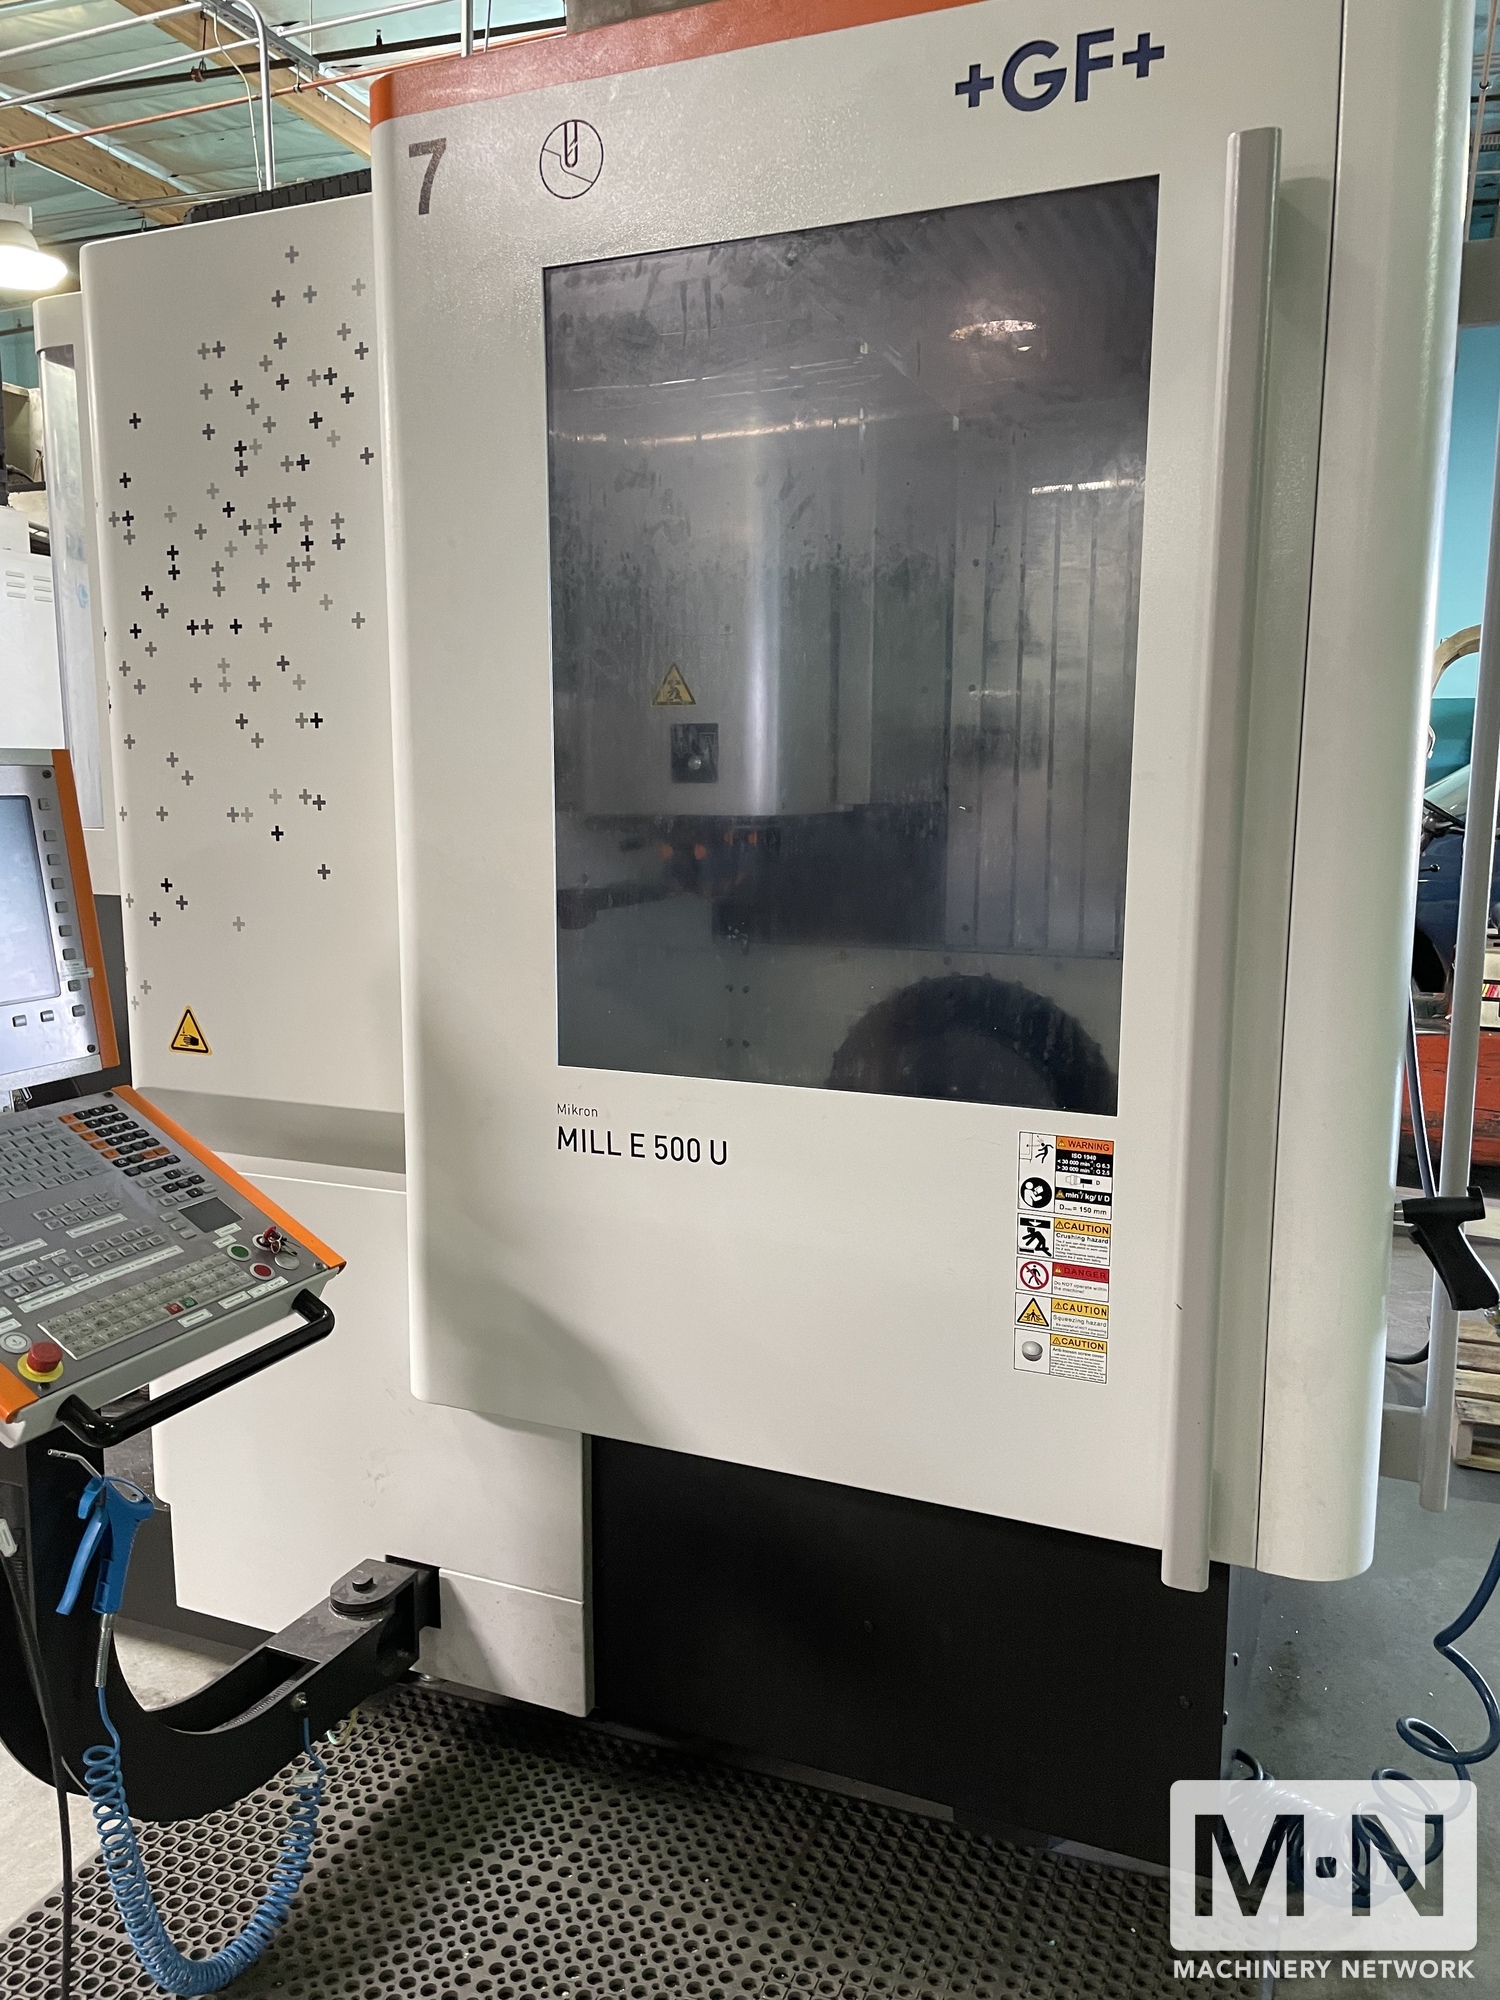 2018 +GF+ MIKRON MILL E 500U Vertical Machining Centers (5-Axis or More) | Machinery Network Inc.